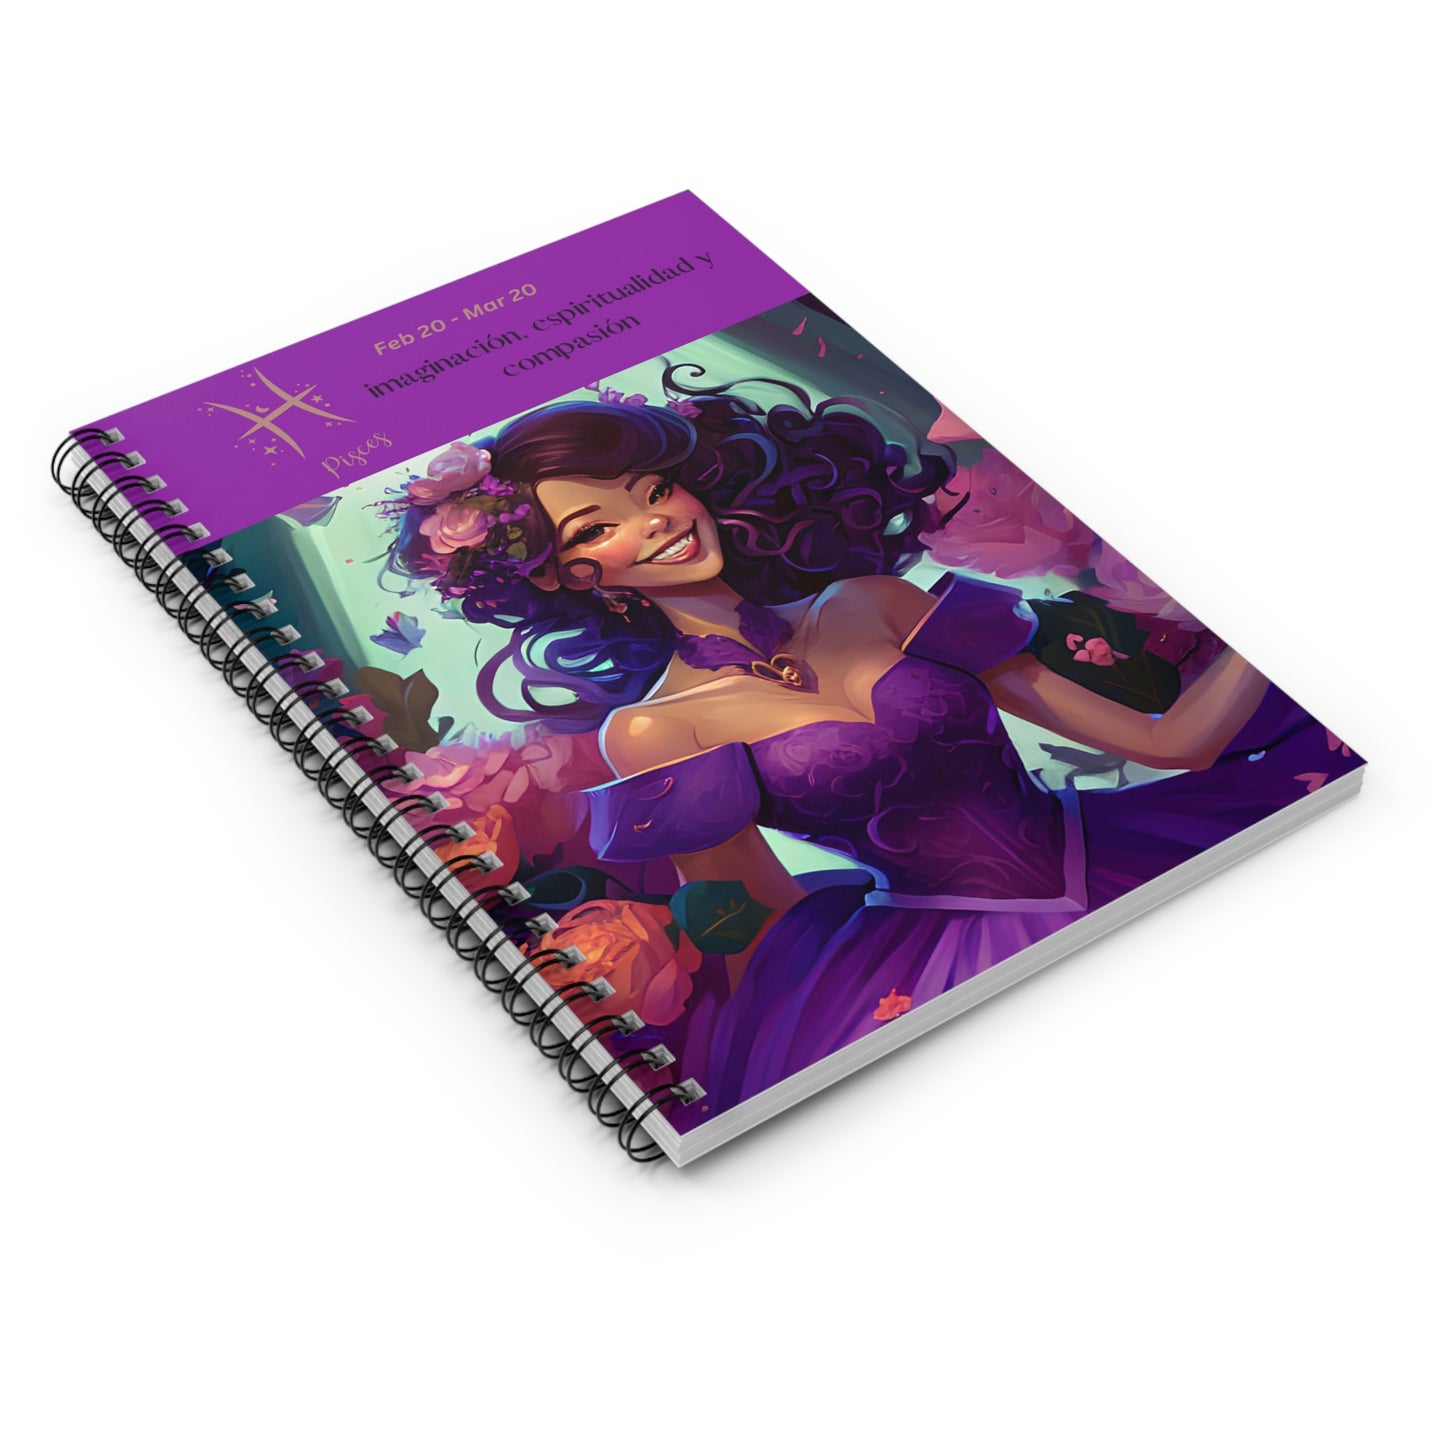 Astrology Collection (Pisces) - Latina Culture Journal - Ruled Line